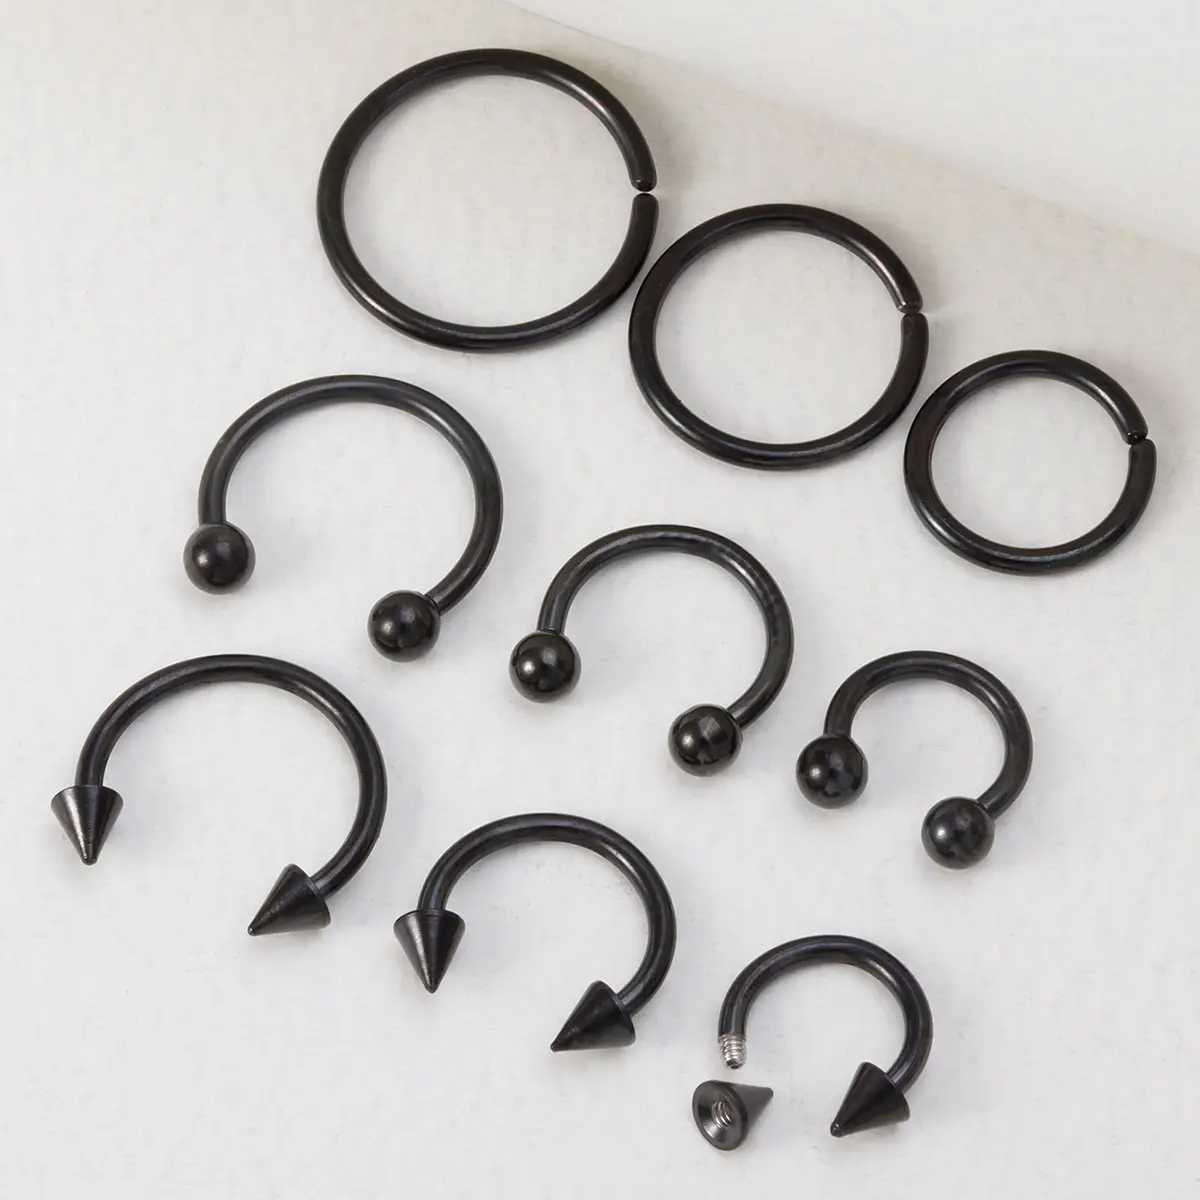 2401 multi-purpose nose stud earrings lip set combination of and body piercing ring stainless steel jewelry wholesale